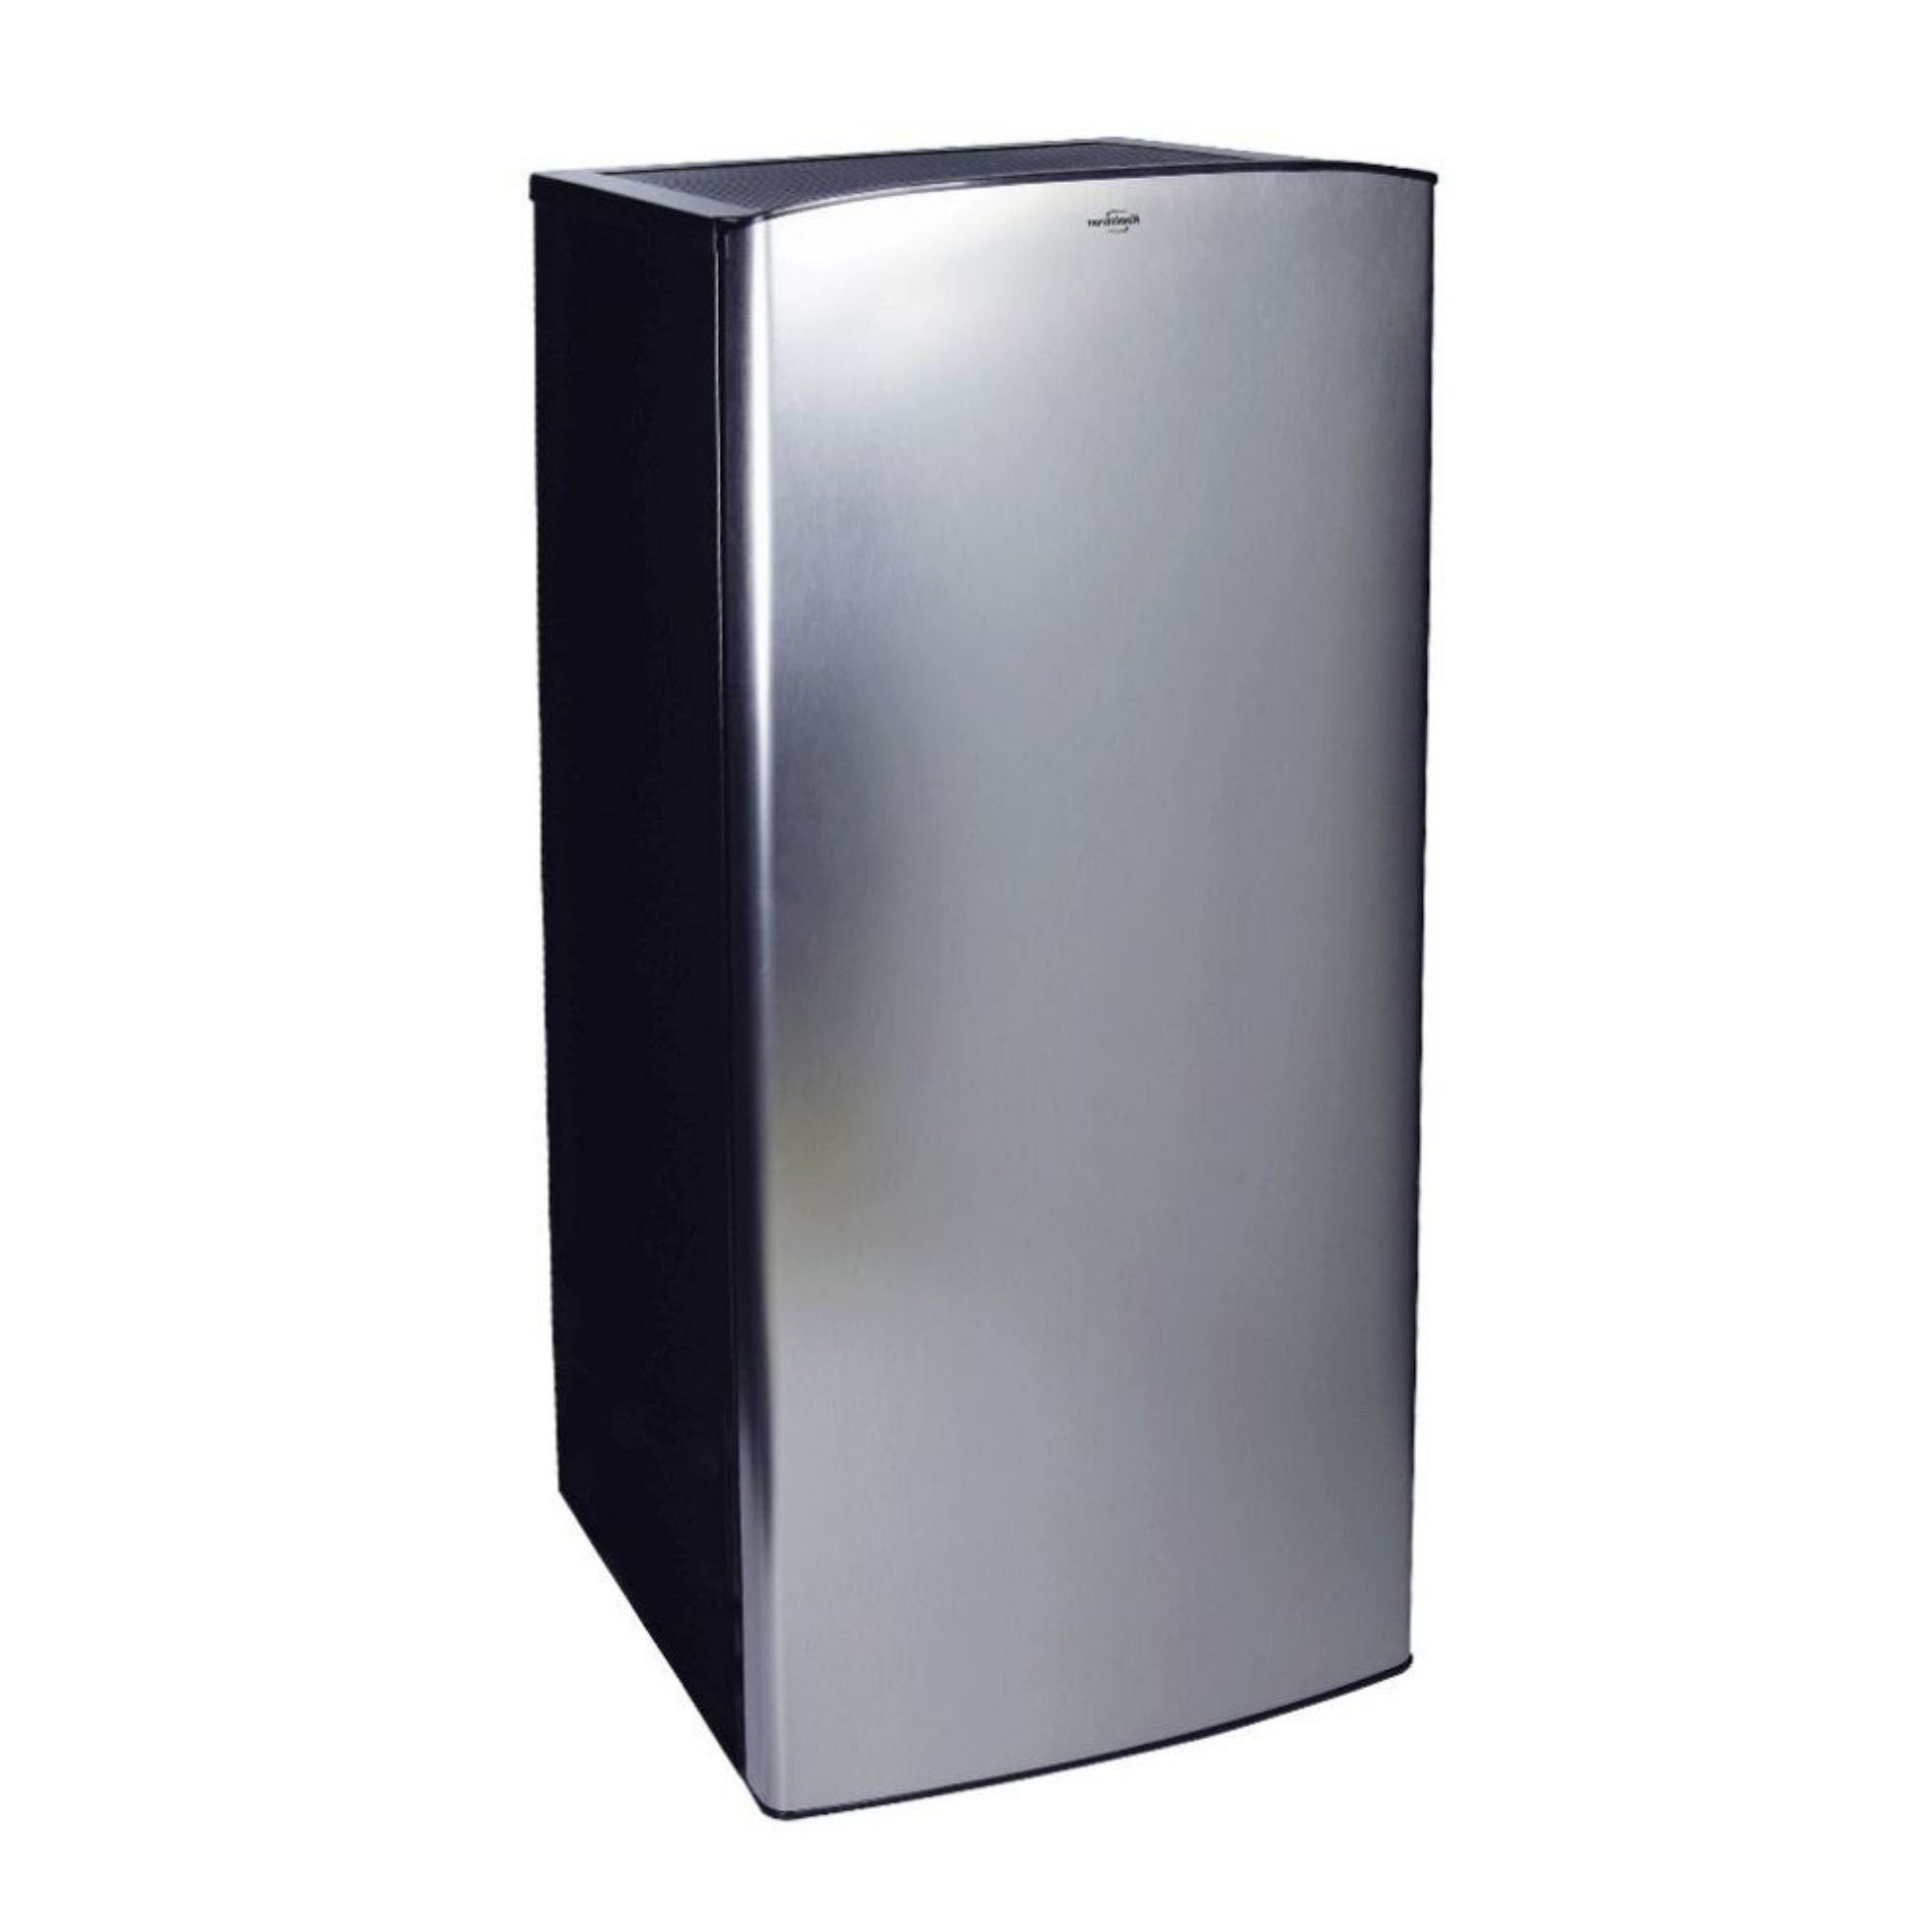 Product shot of black and stainless steel compact fridge with freezer on a white background